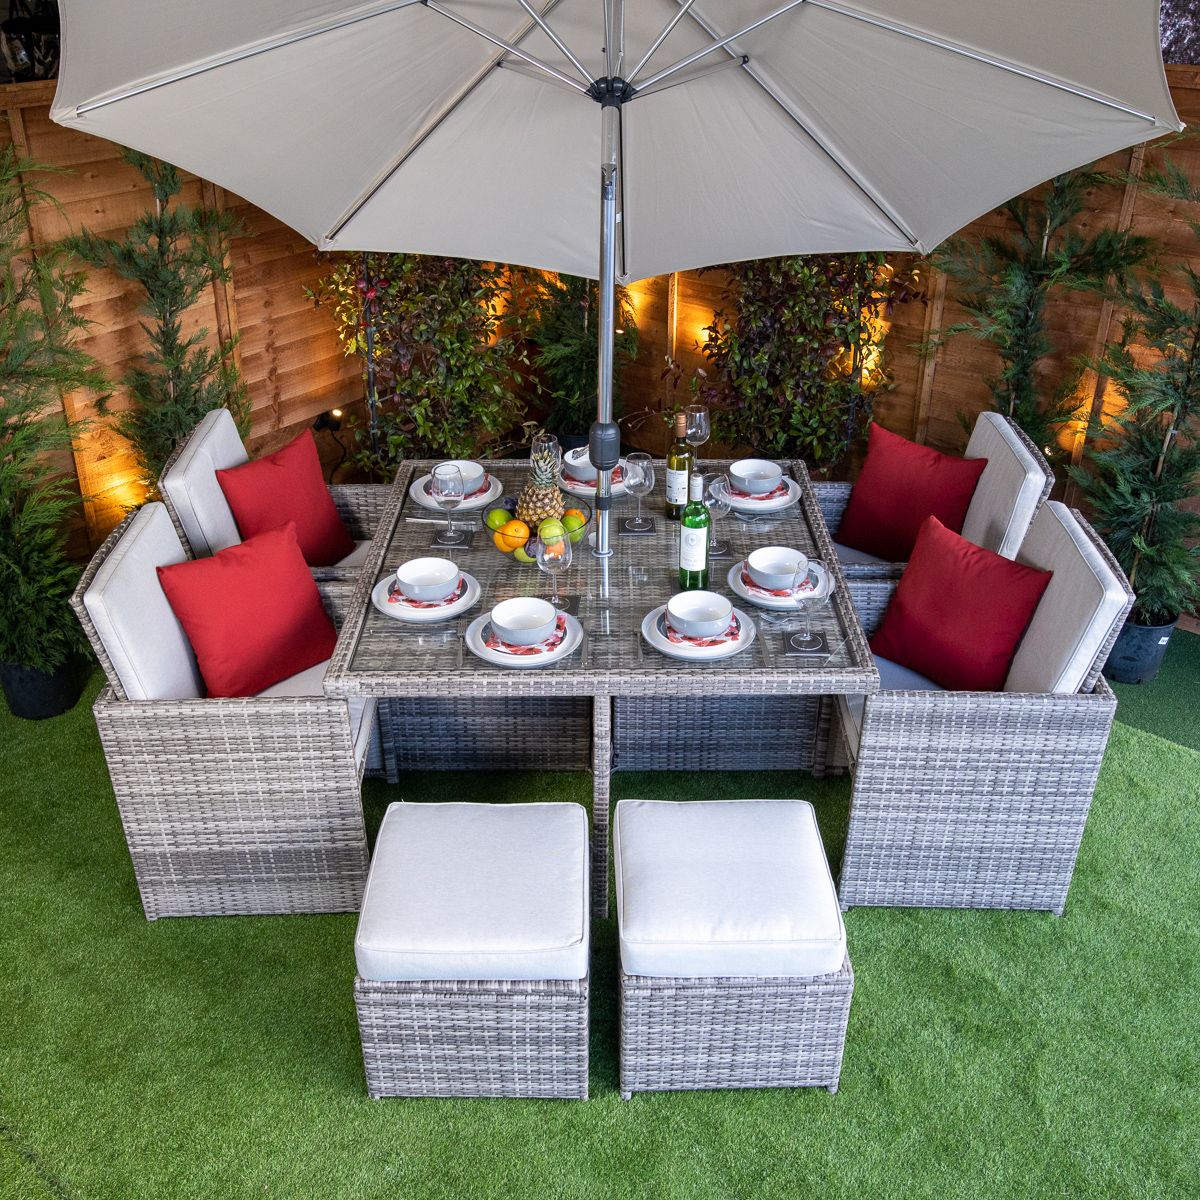 Rattan vs. Wood: Which is the Best Choice for Your Garden Furniture?